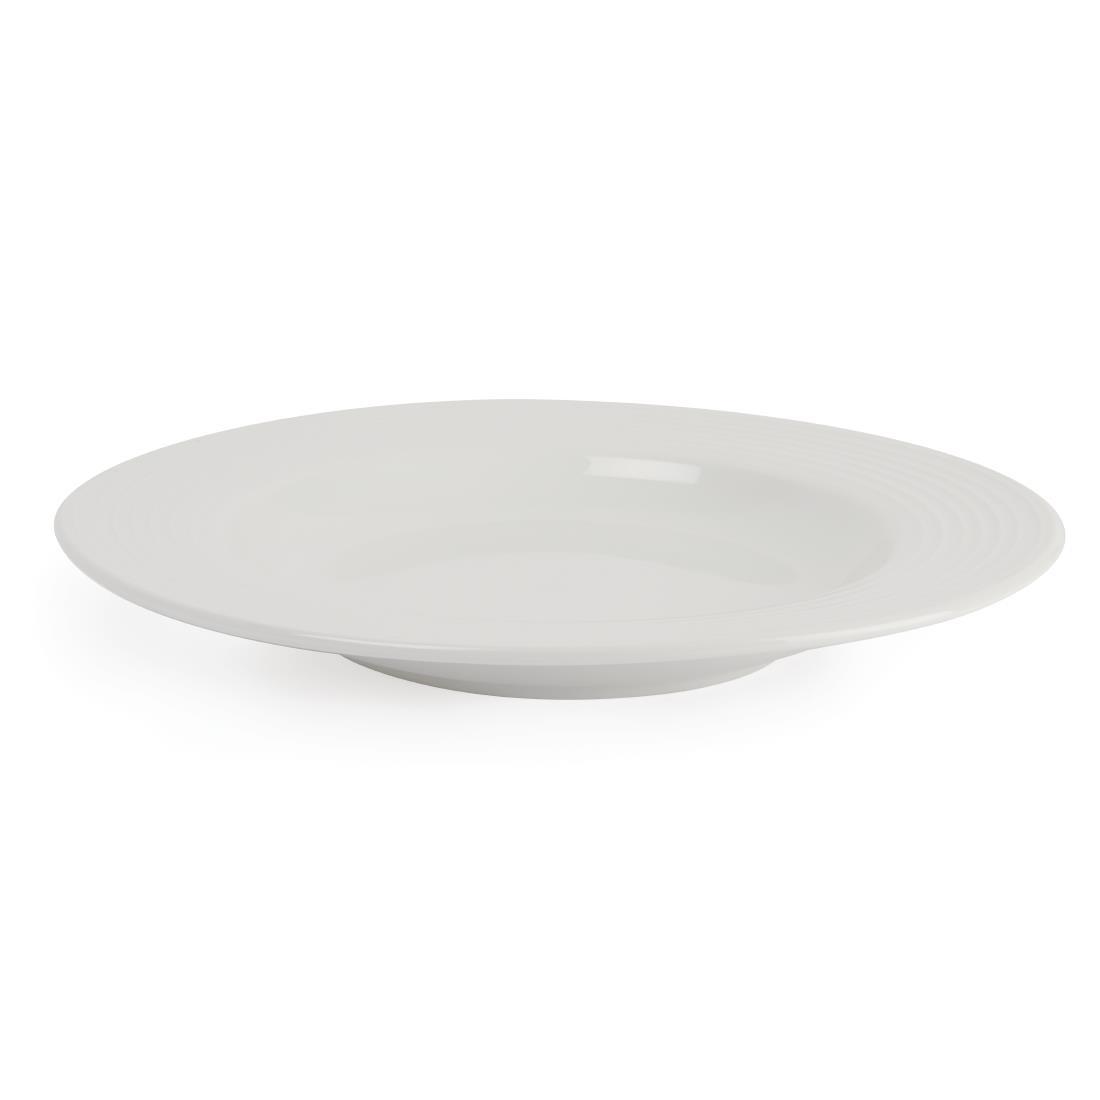 Olympia Linear Pasta Plates 310mm (Pack of 6) - U096  - 5